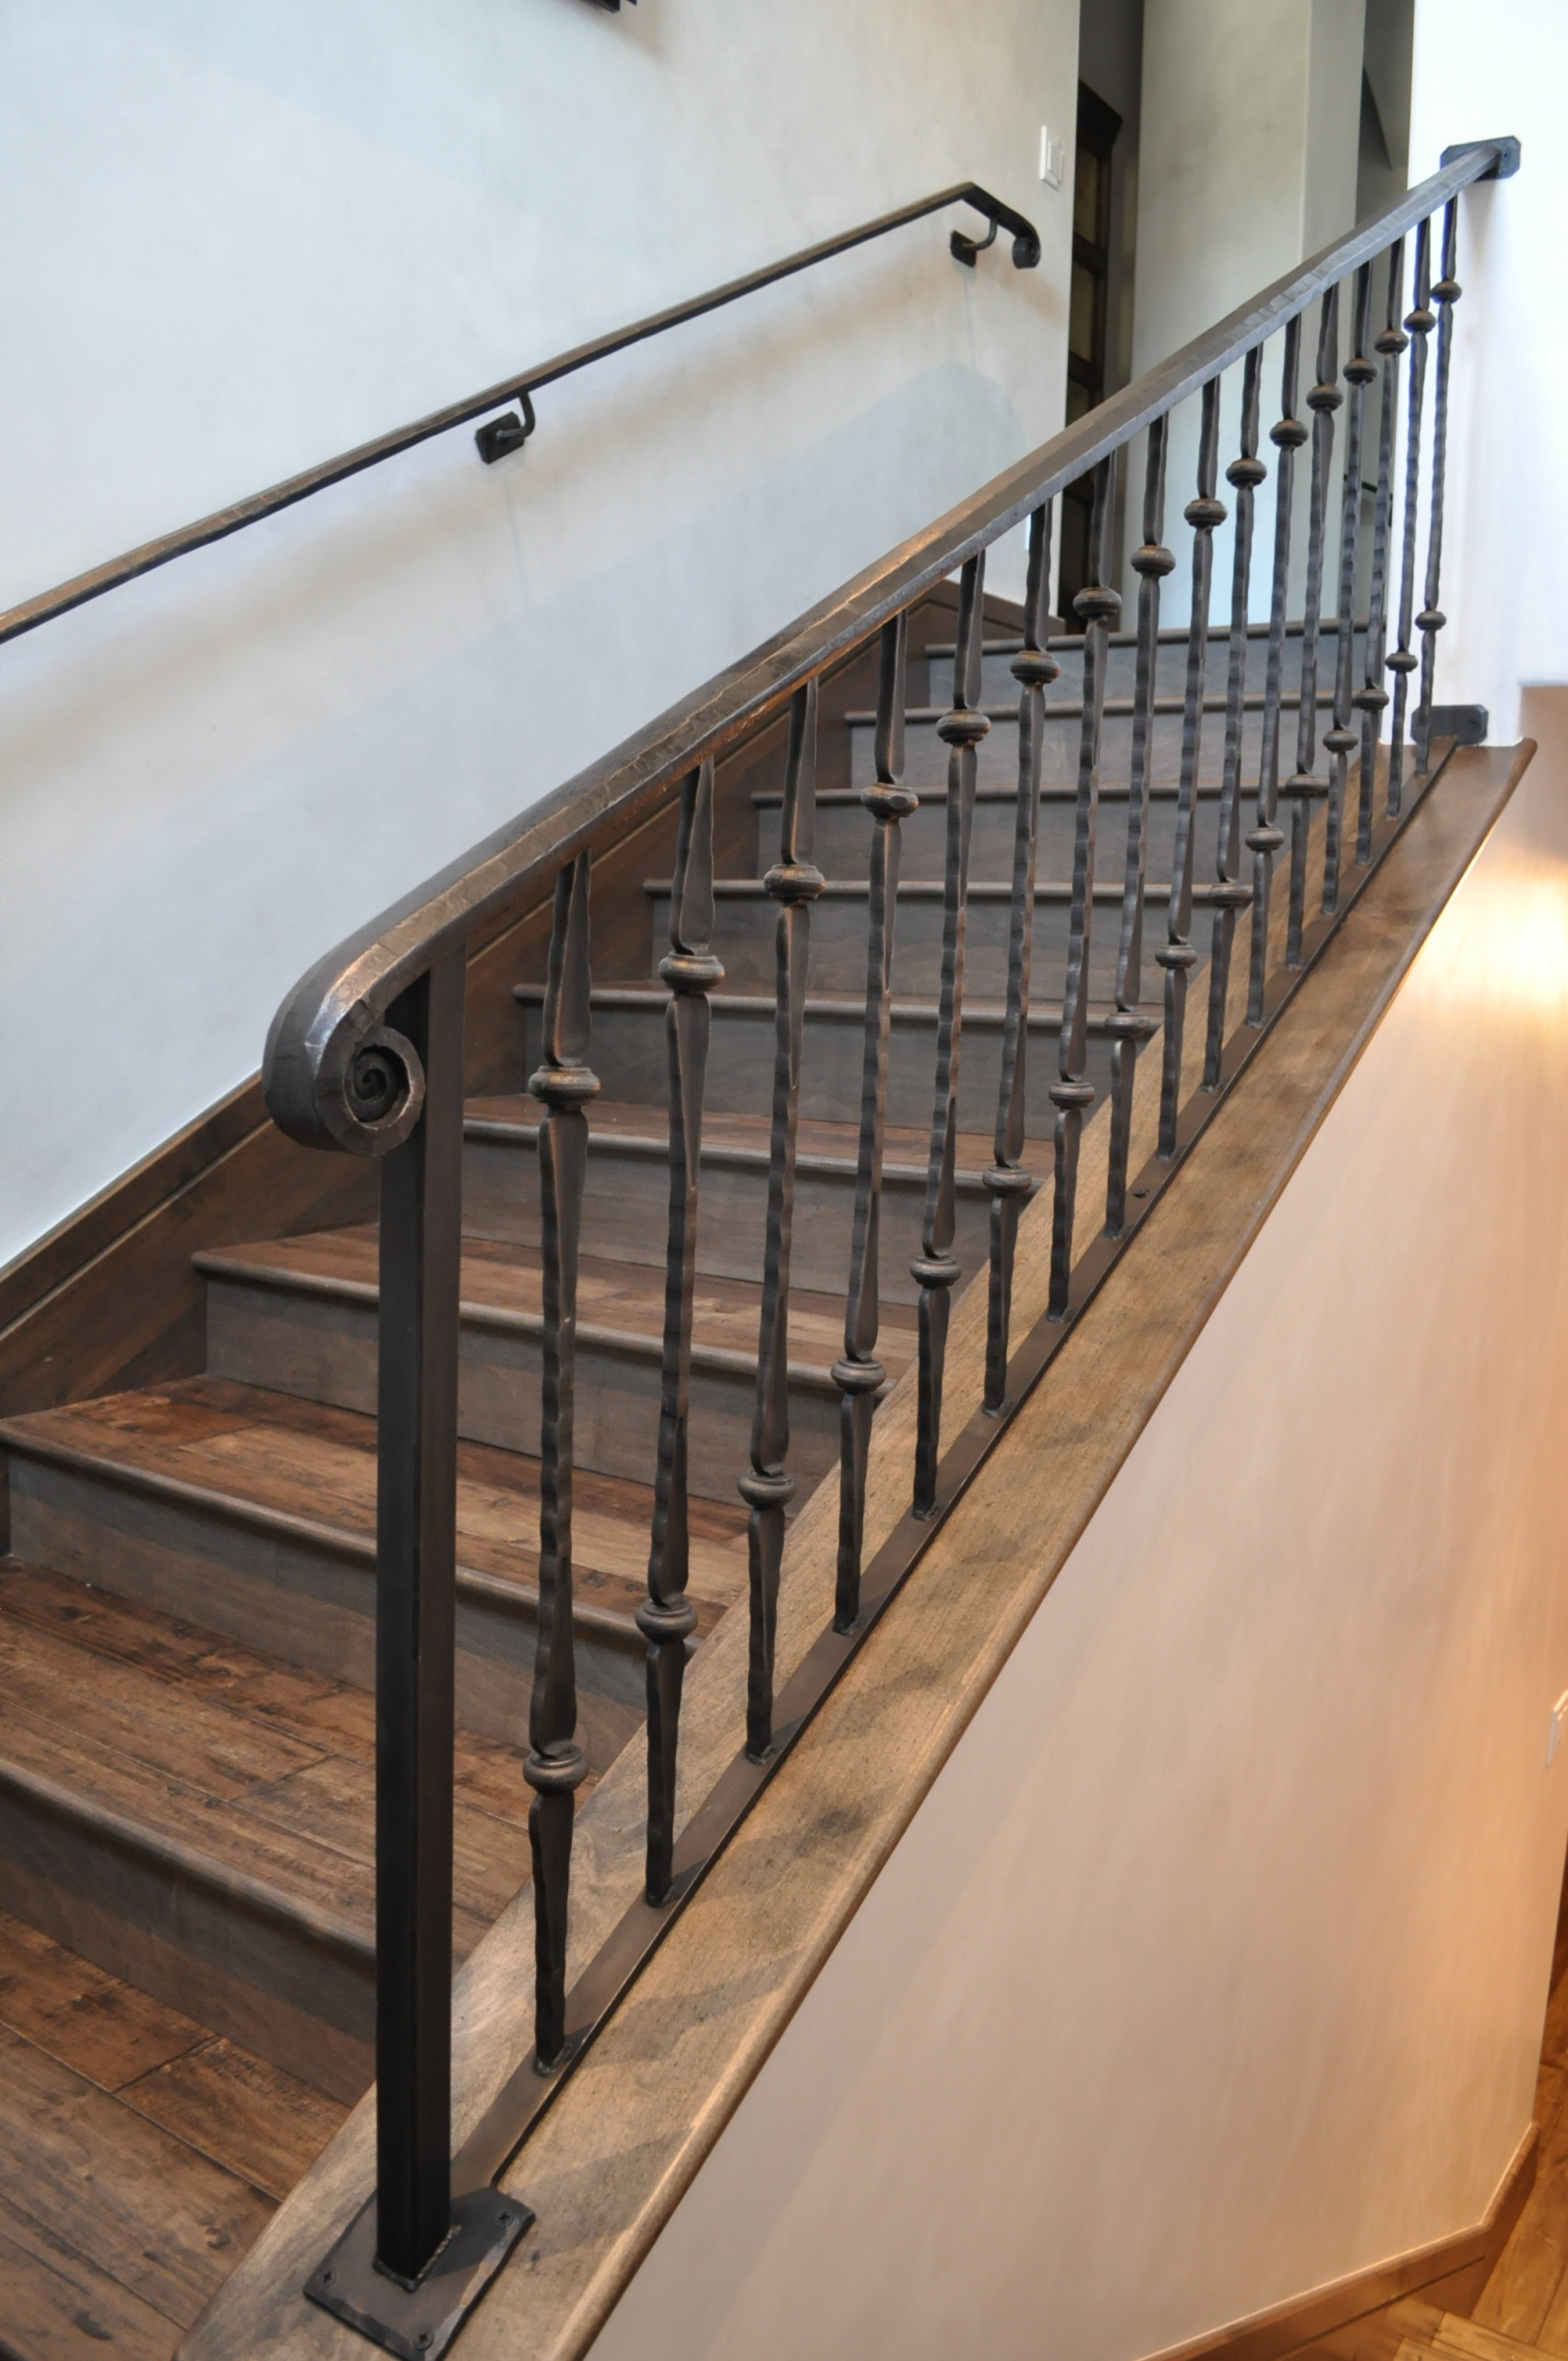 STAIRS CLASSIC - Staircase systems from Trapa